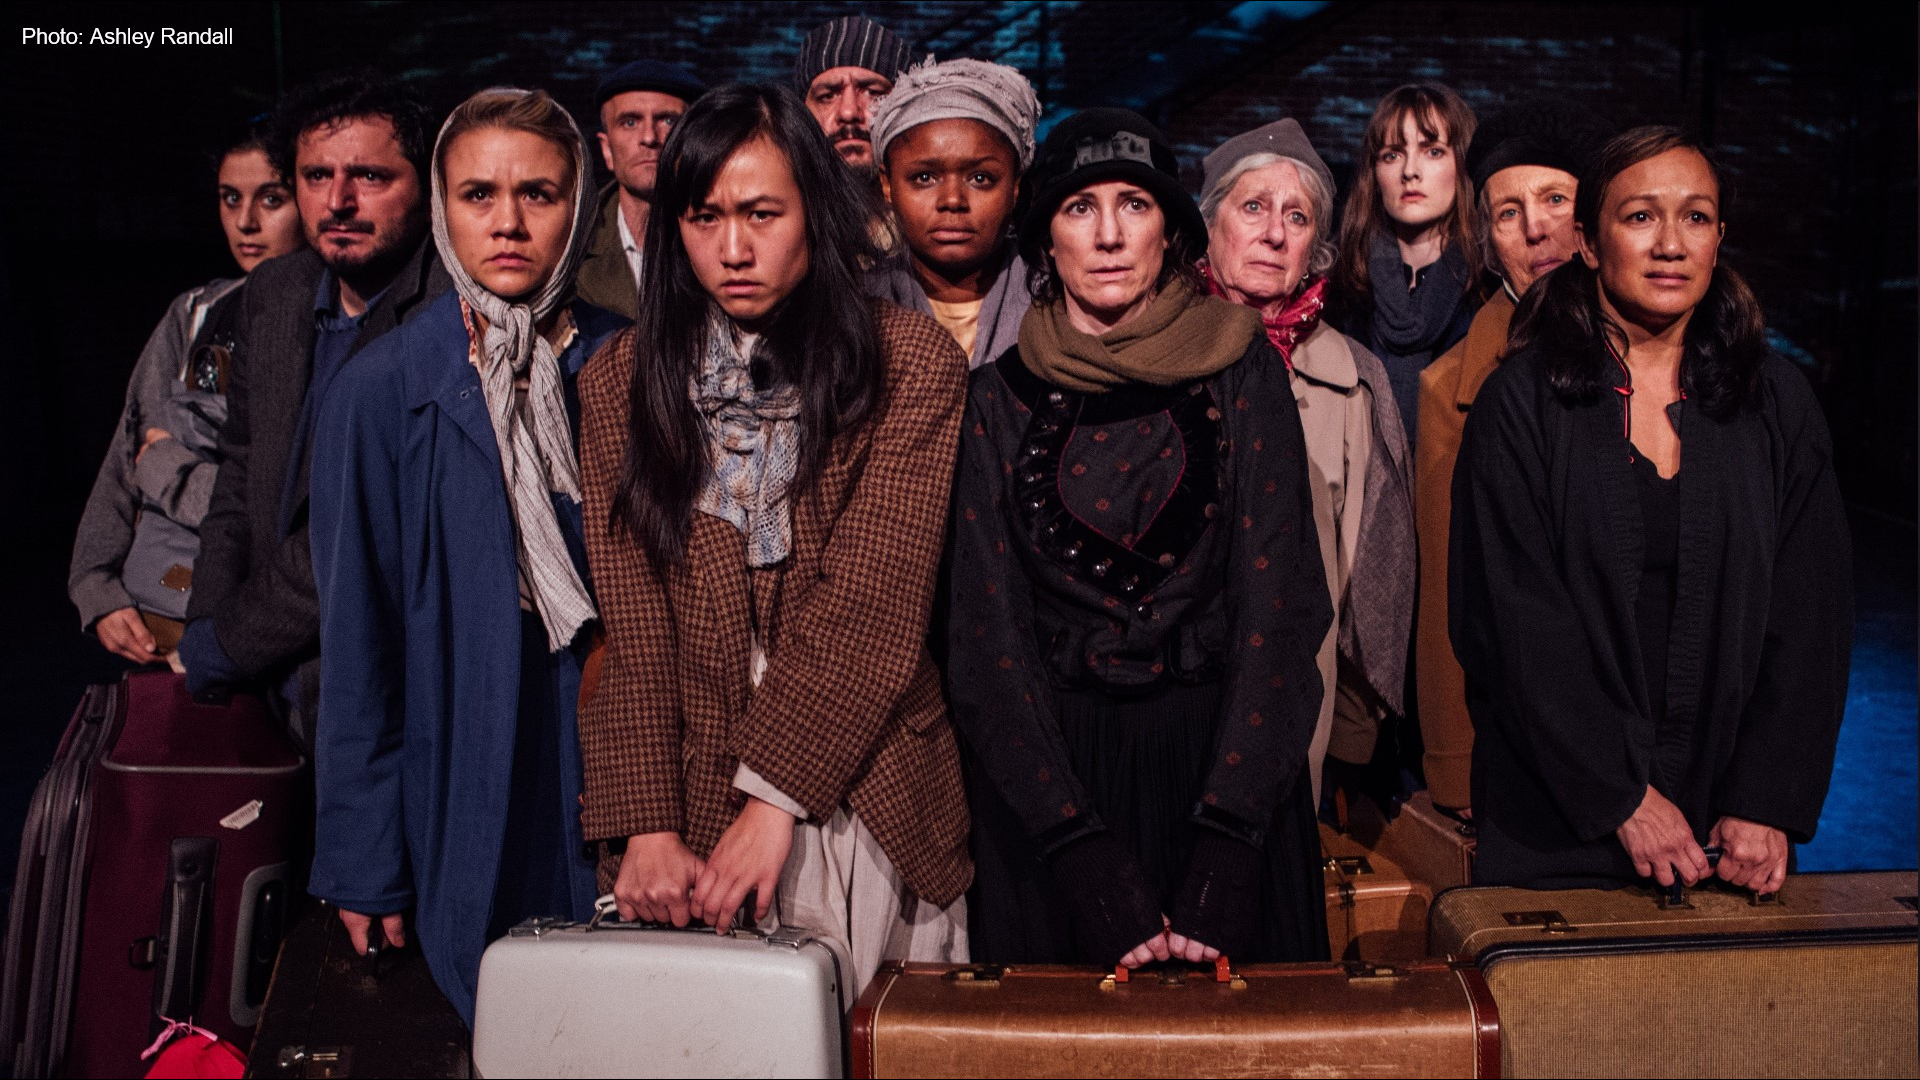 An homage to the strength and resilience of the immigrants and refugees that risked their lives to find a better life.  At the Moore Theatre Feb 20-22.